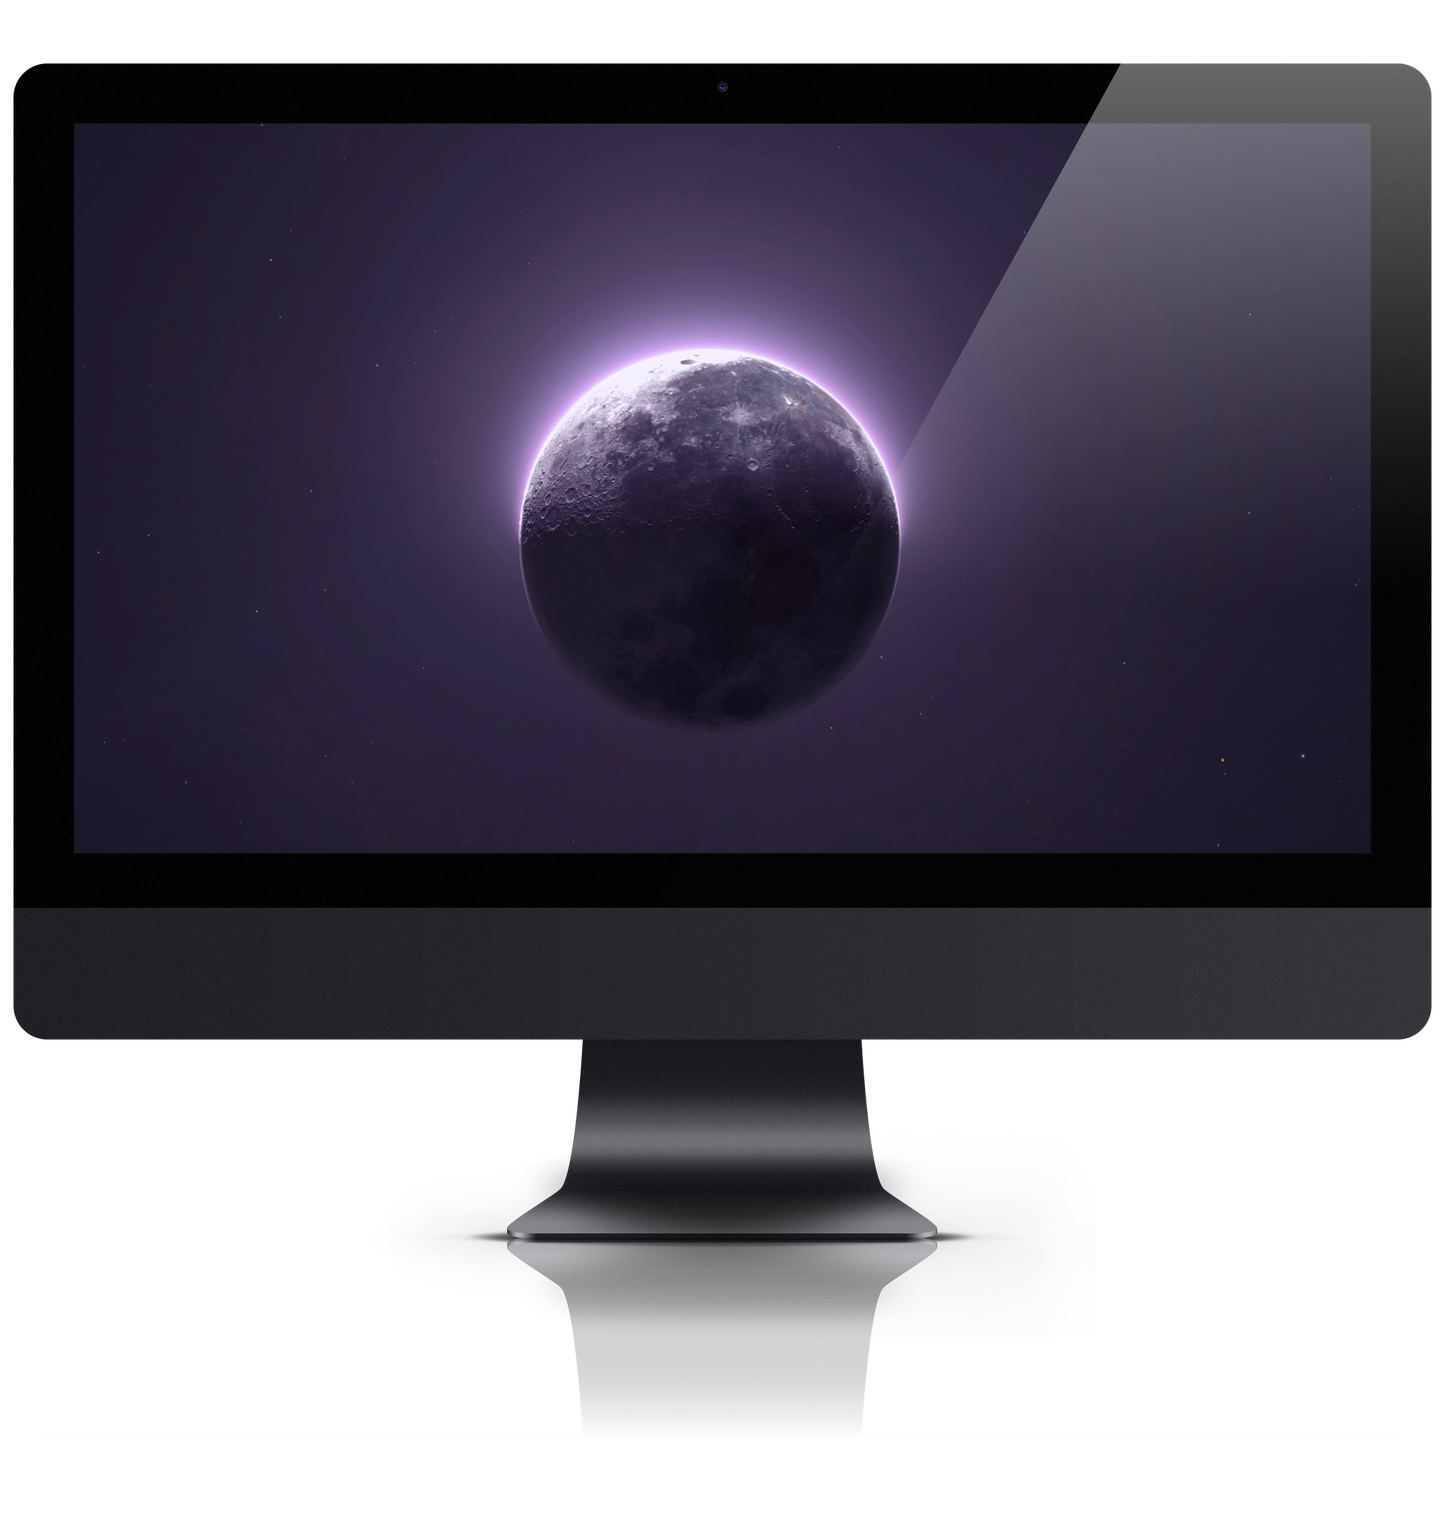 Waning Crescent Moon of September 18th in Purple Chrome PC Wallpaper